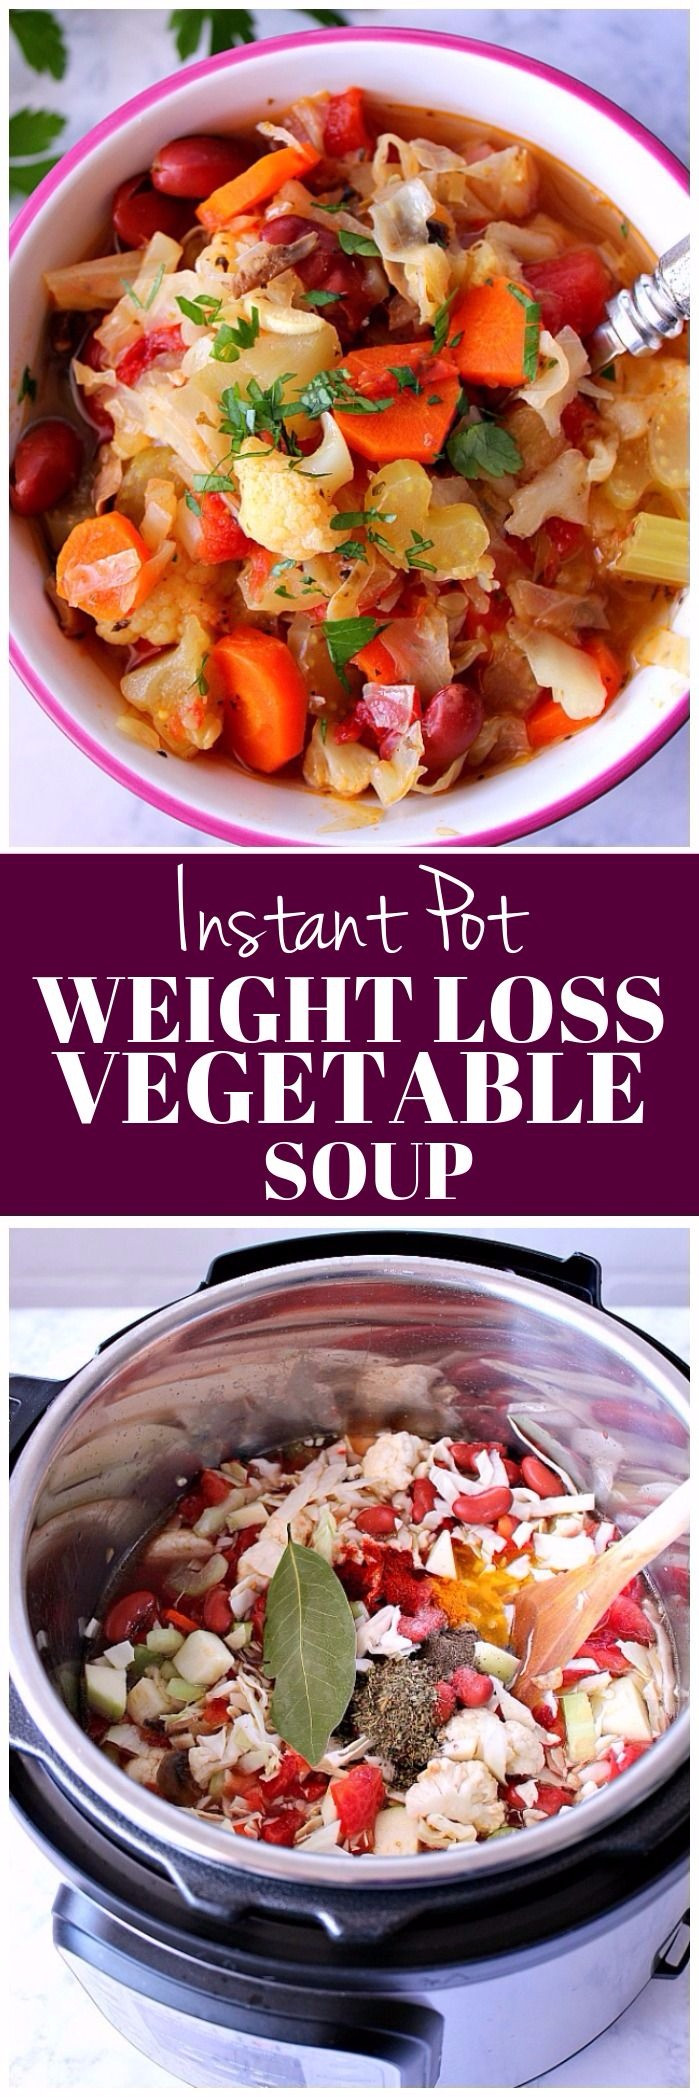 Healthy Vegetable Soup Recipes For Weight Loss
 Instant Pot Weight Loss Ve able Soup Recipe Crunchy